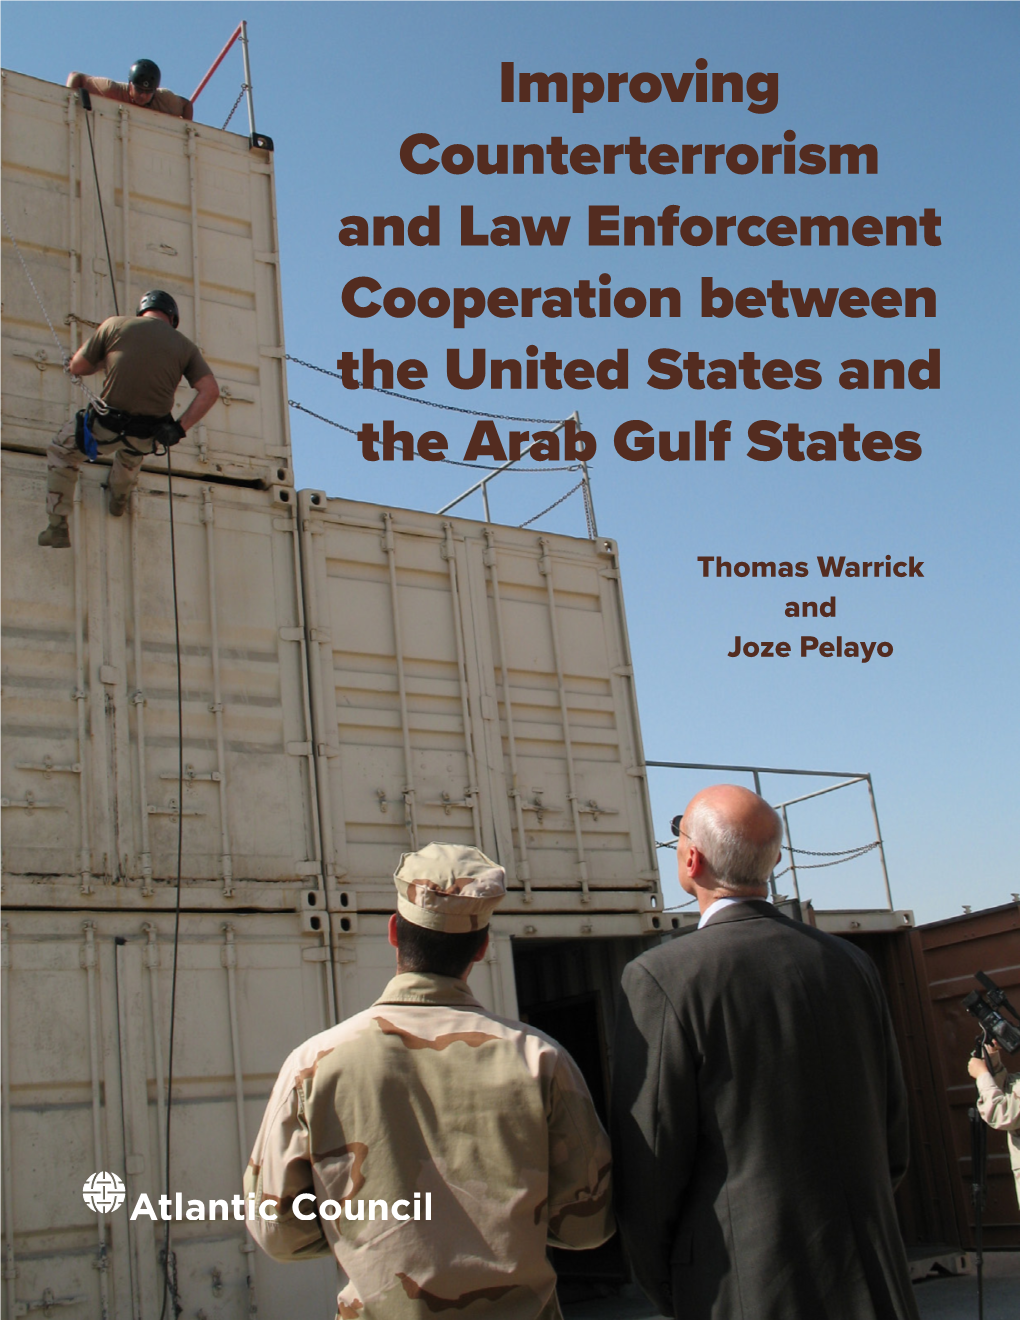 Improving Counterterrorism and Law Enforcement Cooperation Between the United States and the Arab Gulf States